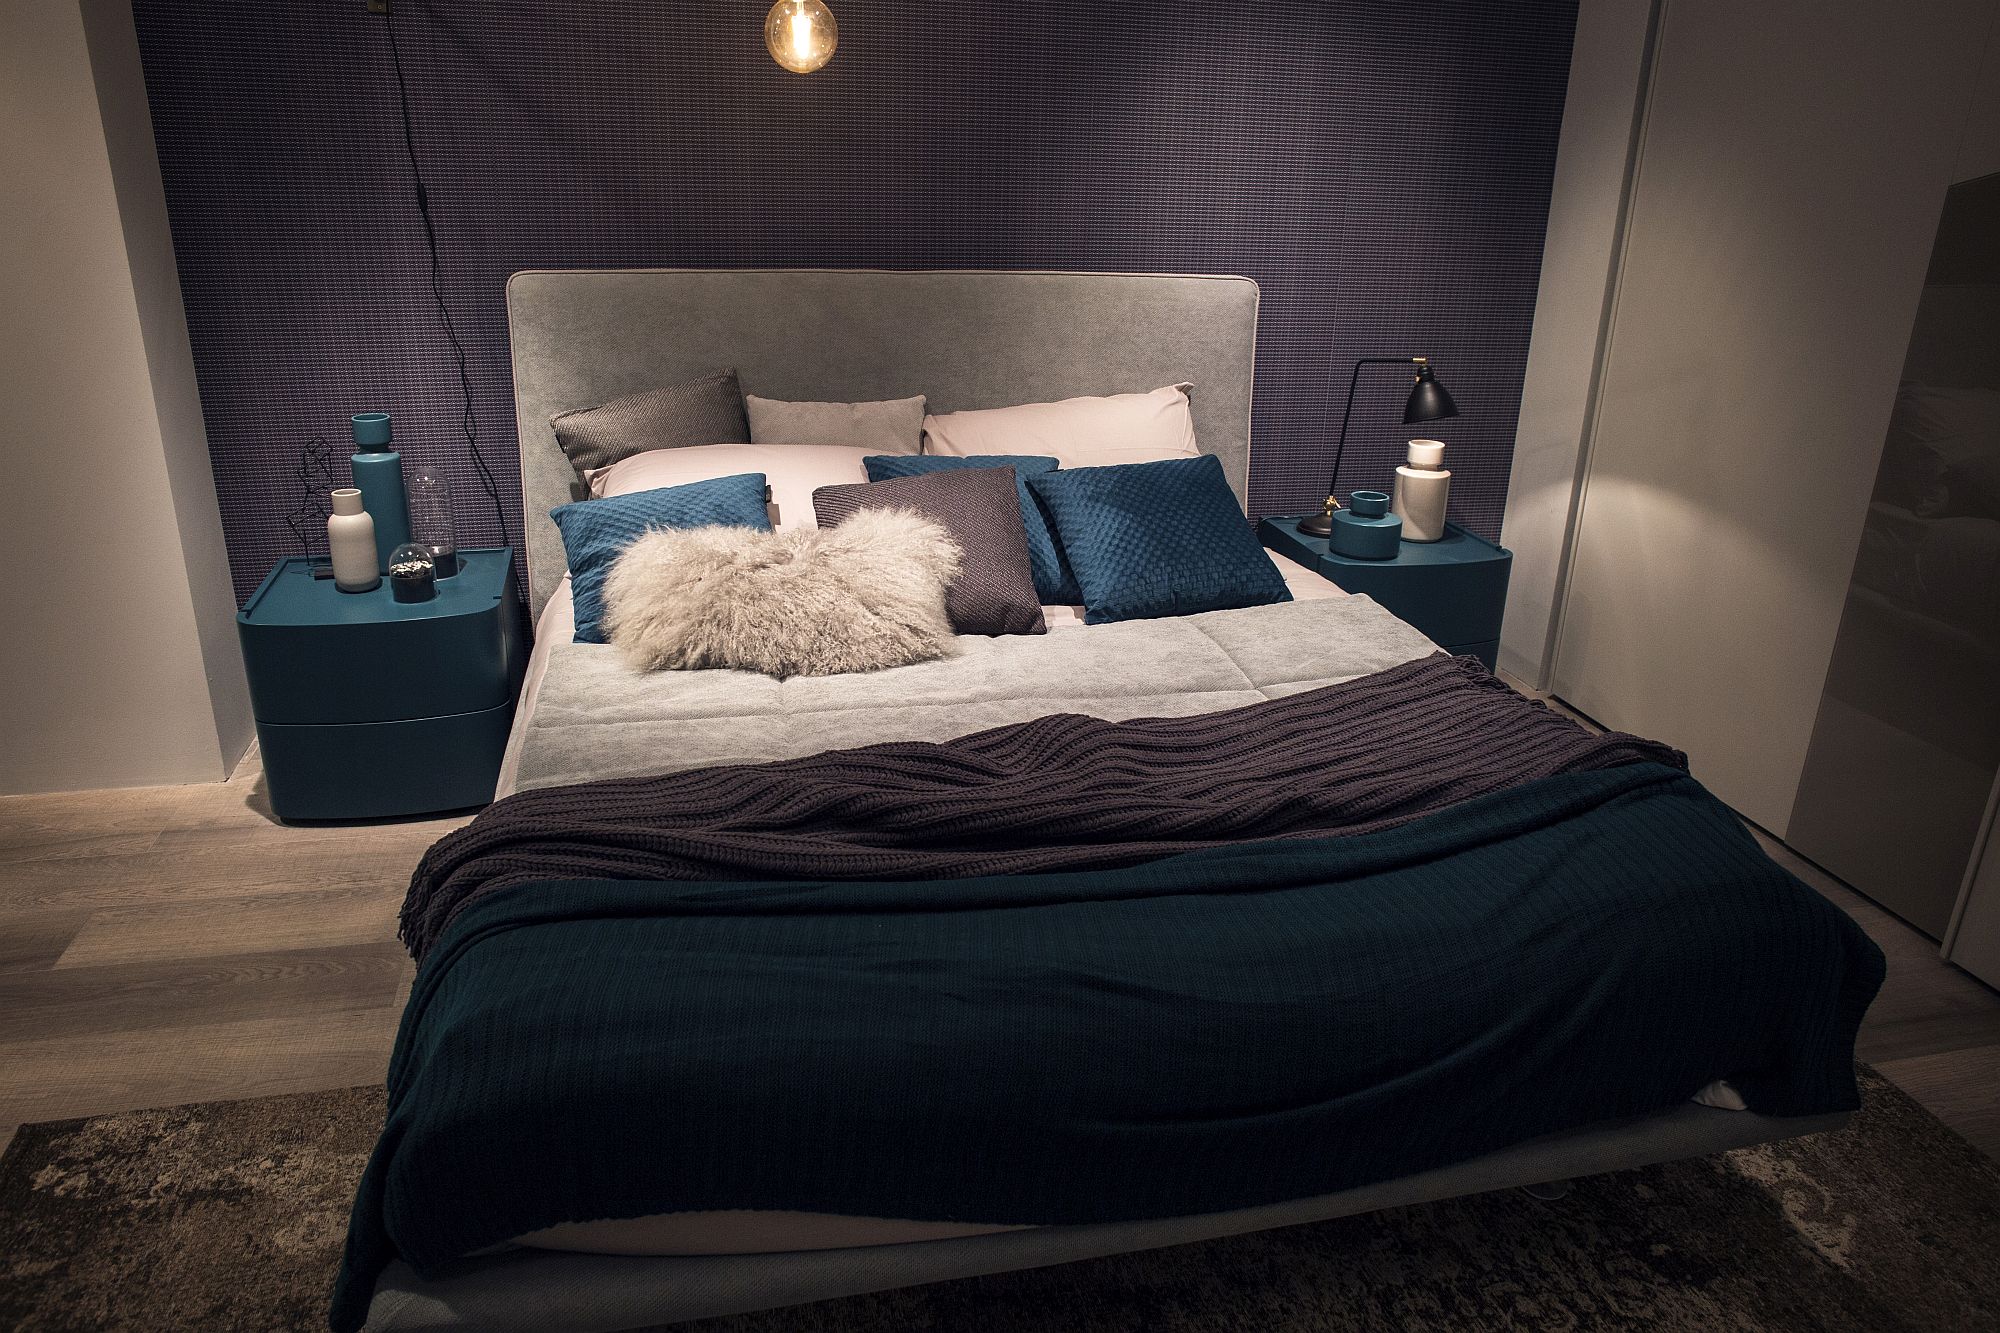 Twin nightstands add to the color scheme of the bedroom